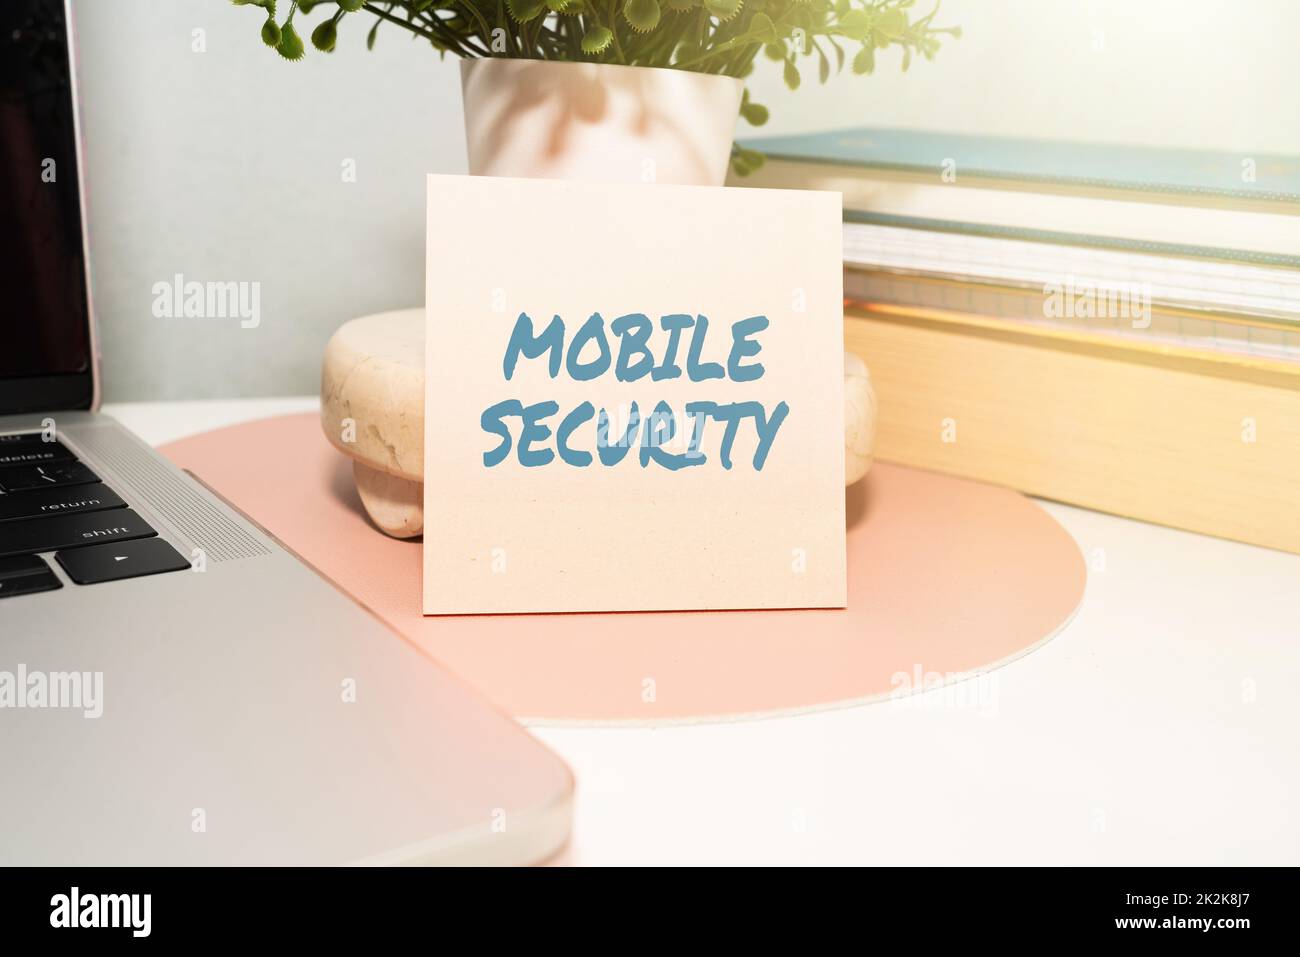 Writing displaying text Mobile Security. Business overview Protection of mobile phone from threats and vulnerabilities Office Supplies Over Desk With Keyboard And Glasses And Coffee Cup For Working Stock Photo